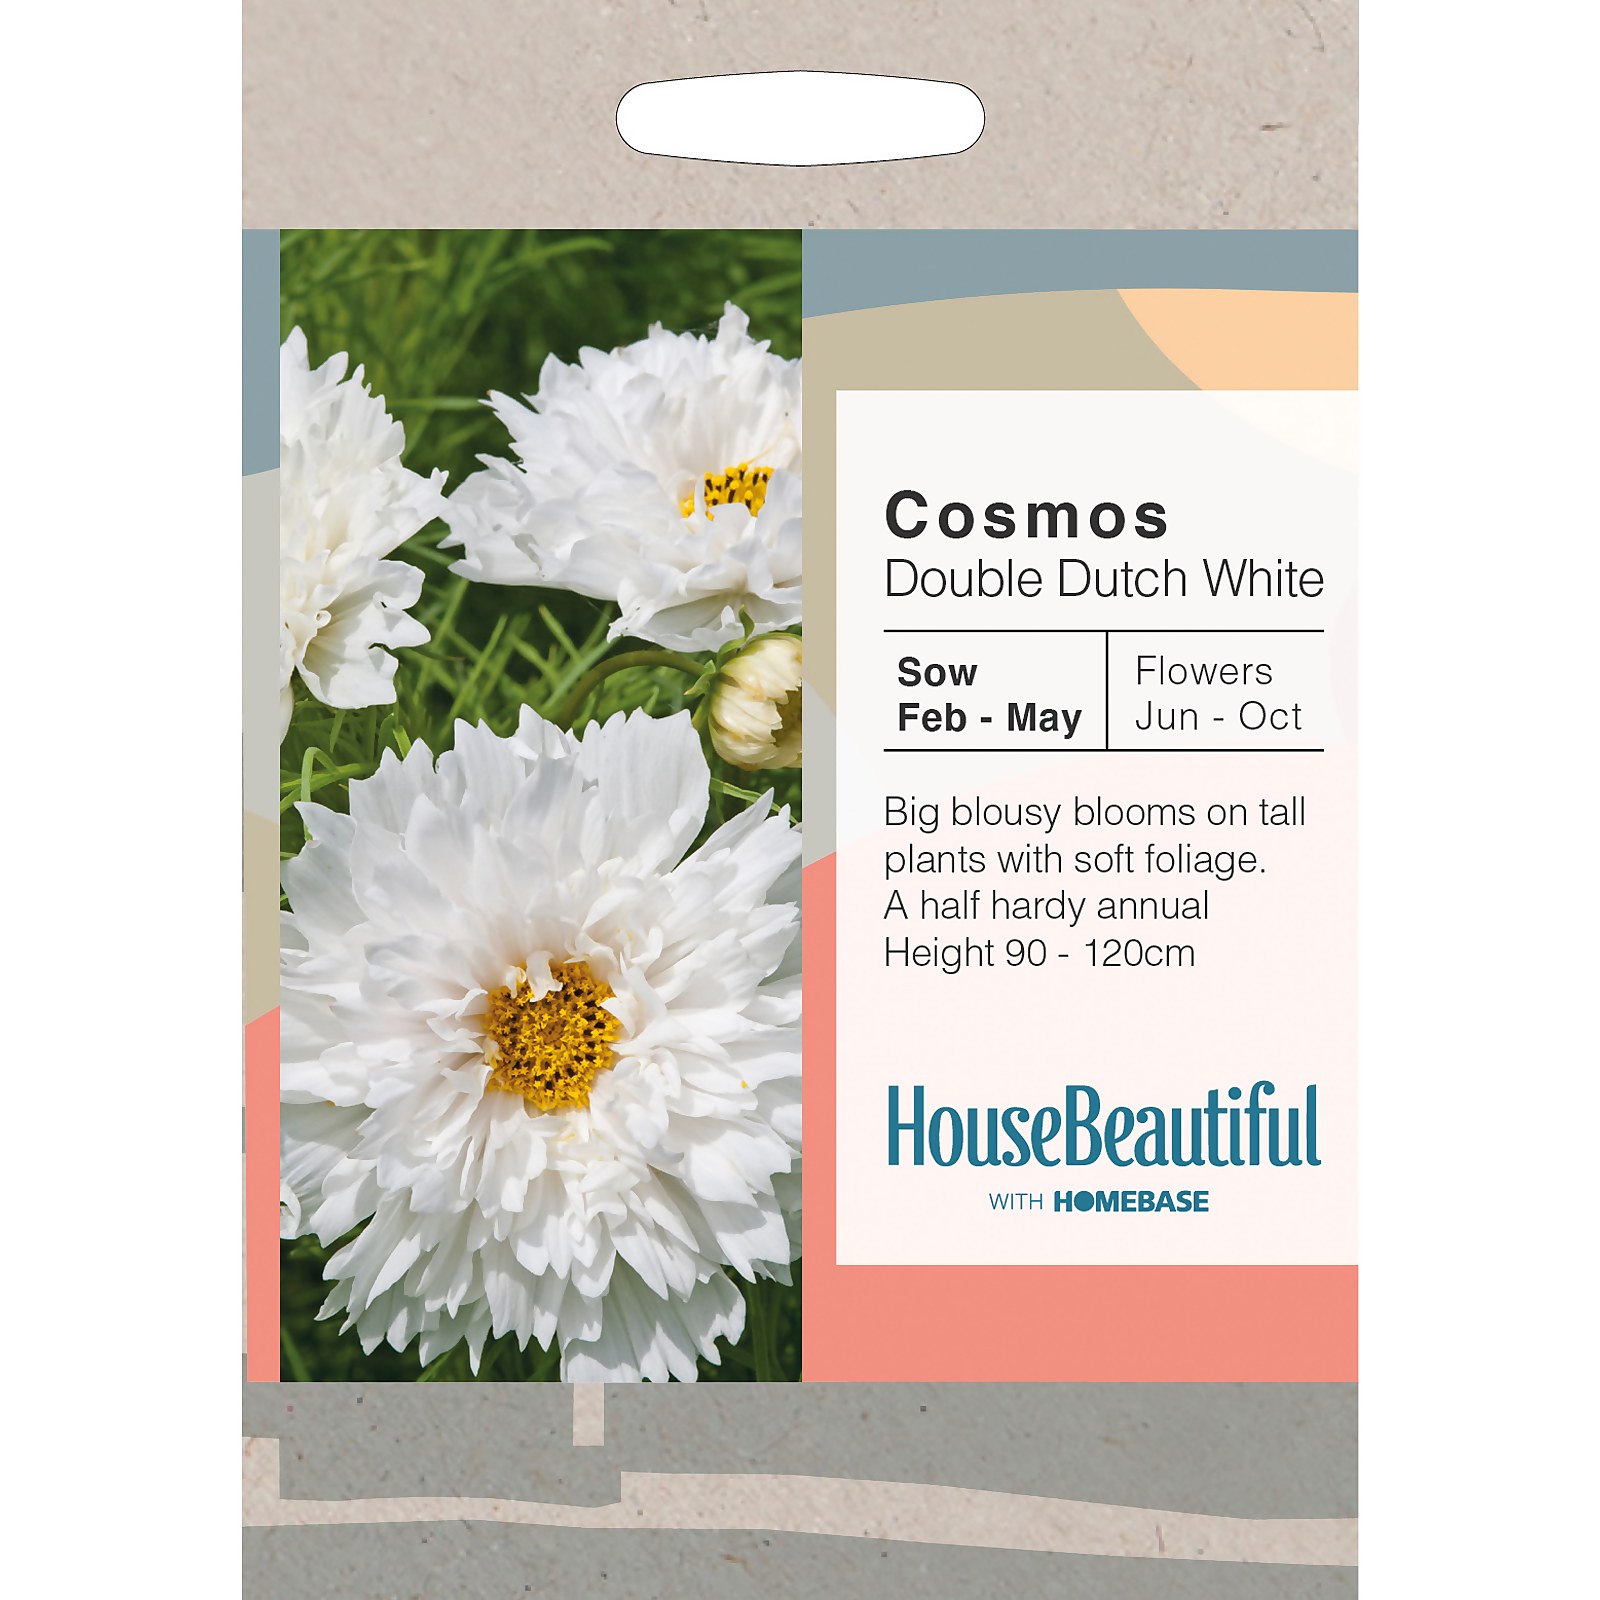 Photo of House Beautiful Cosmos Double Dutch White Seeds